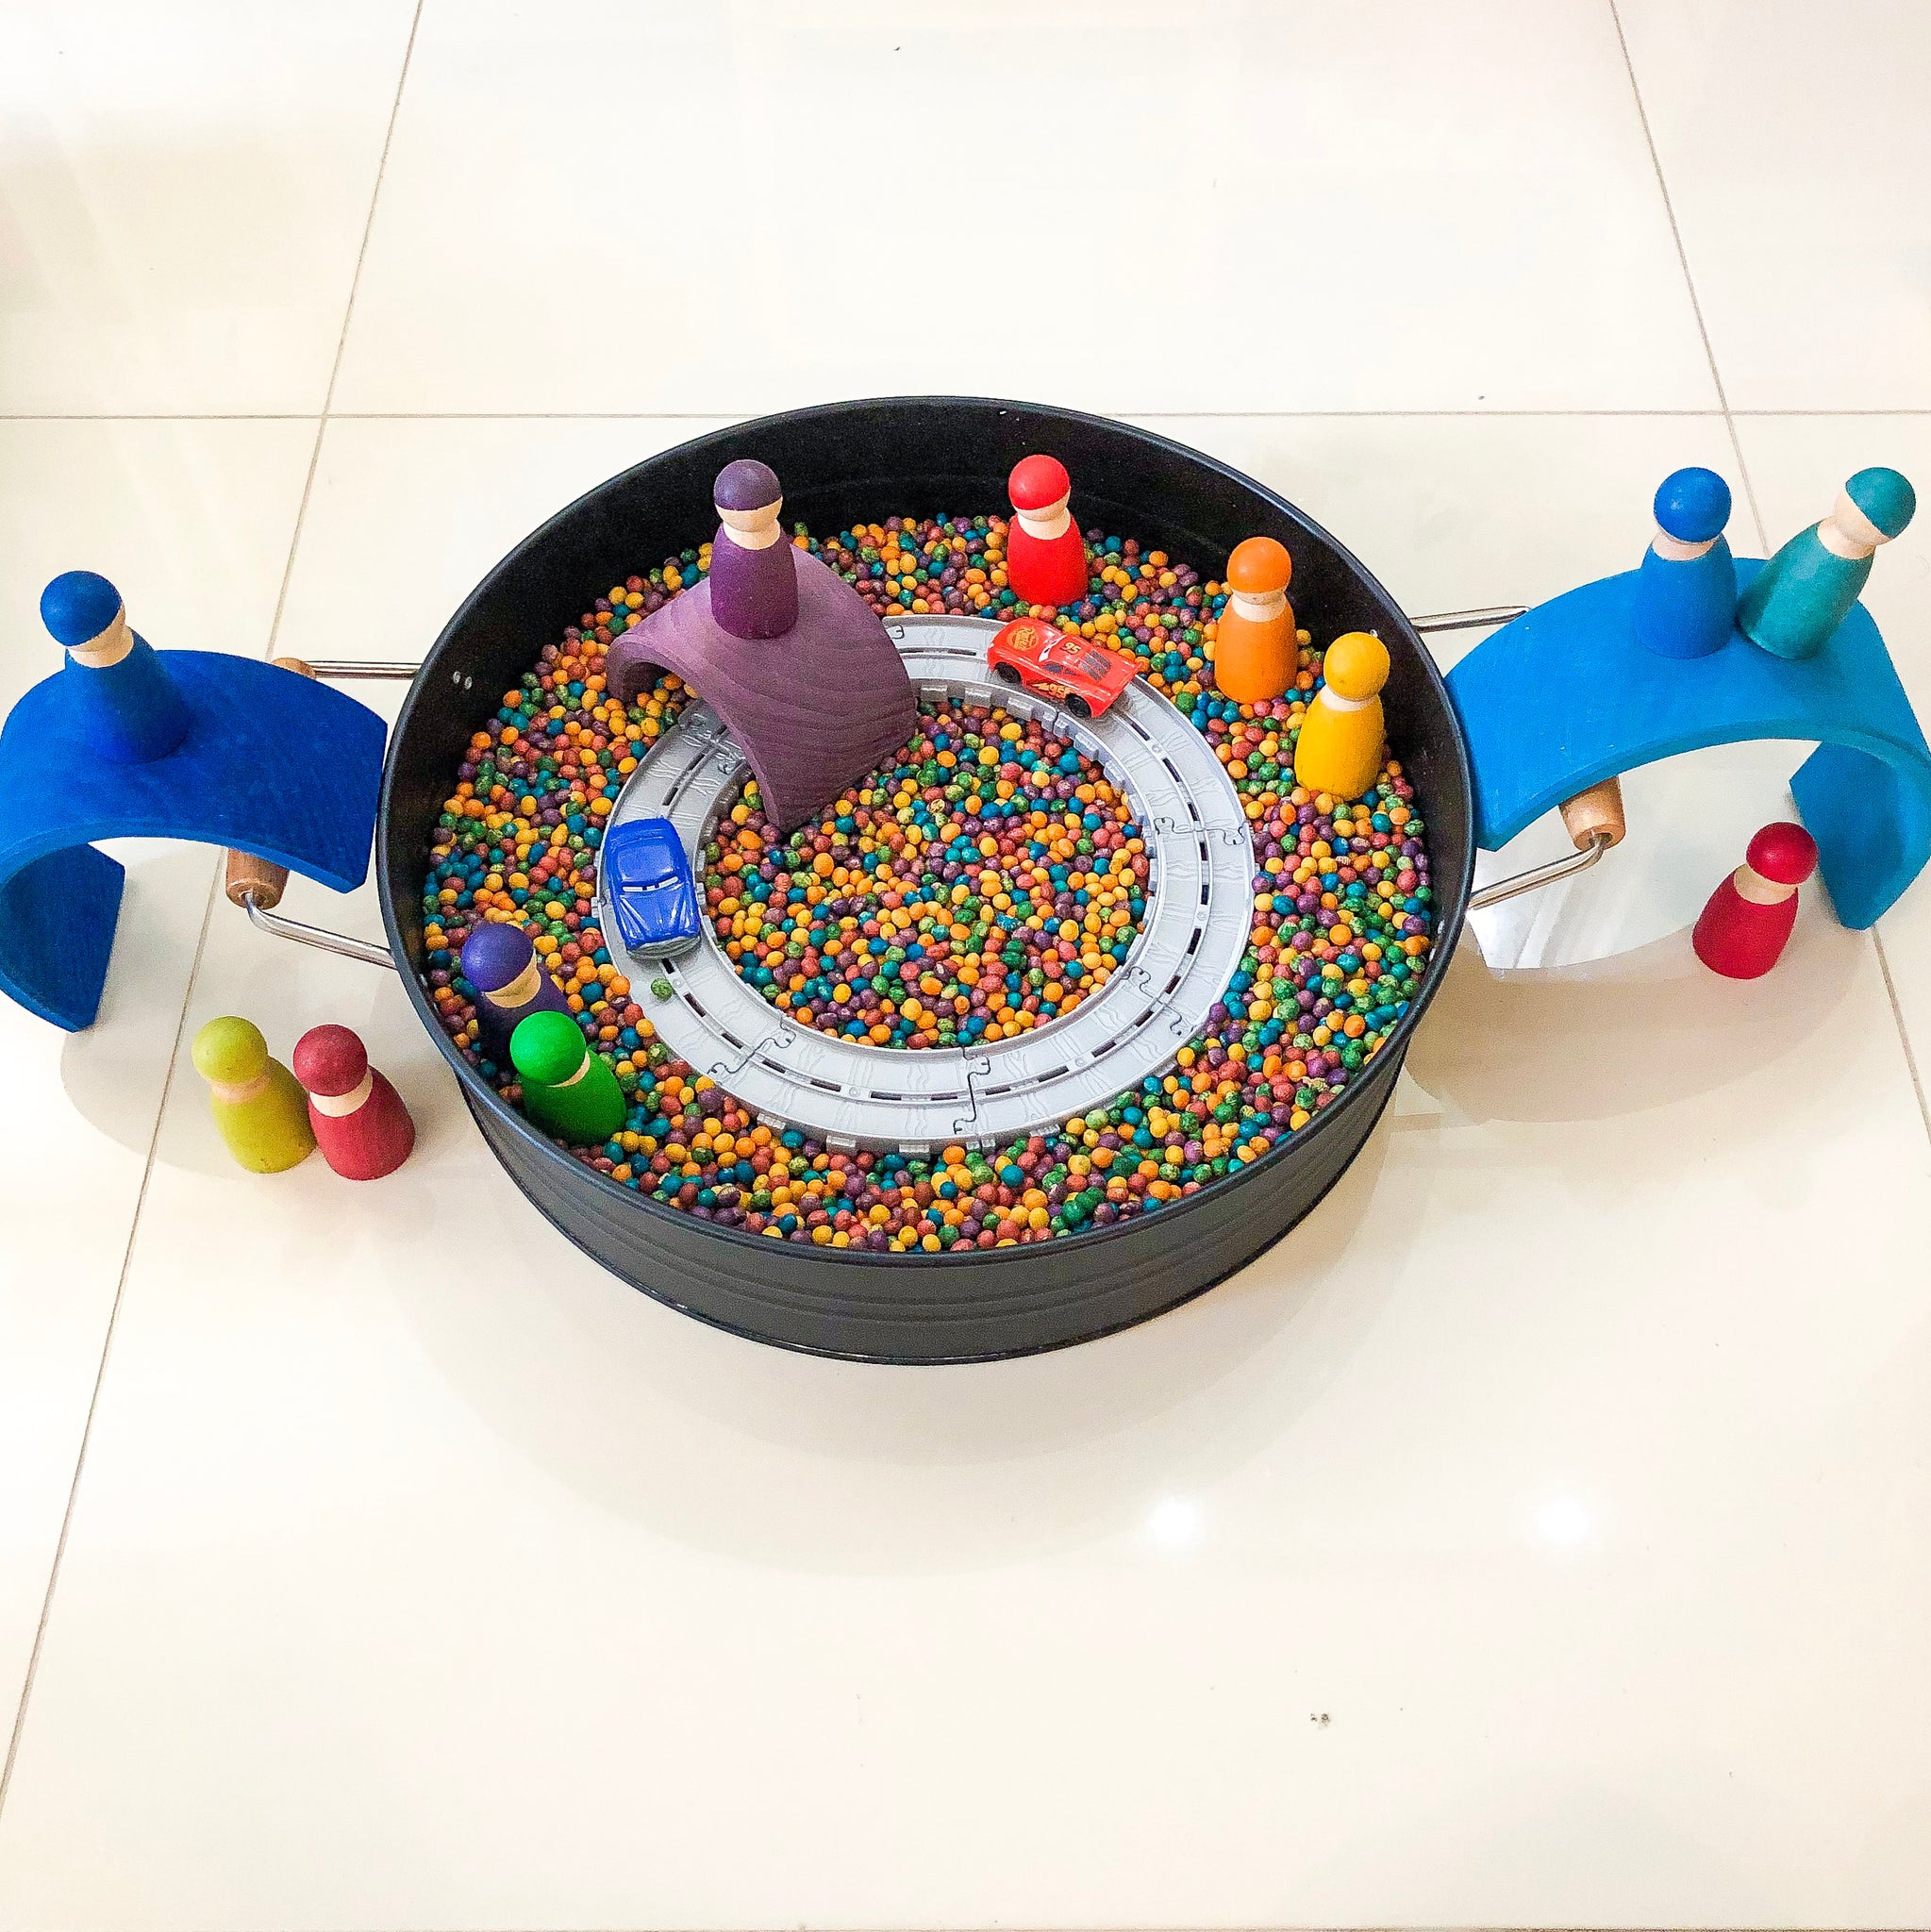 anko sand and water play table